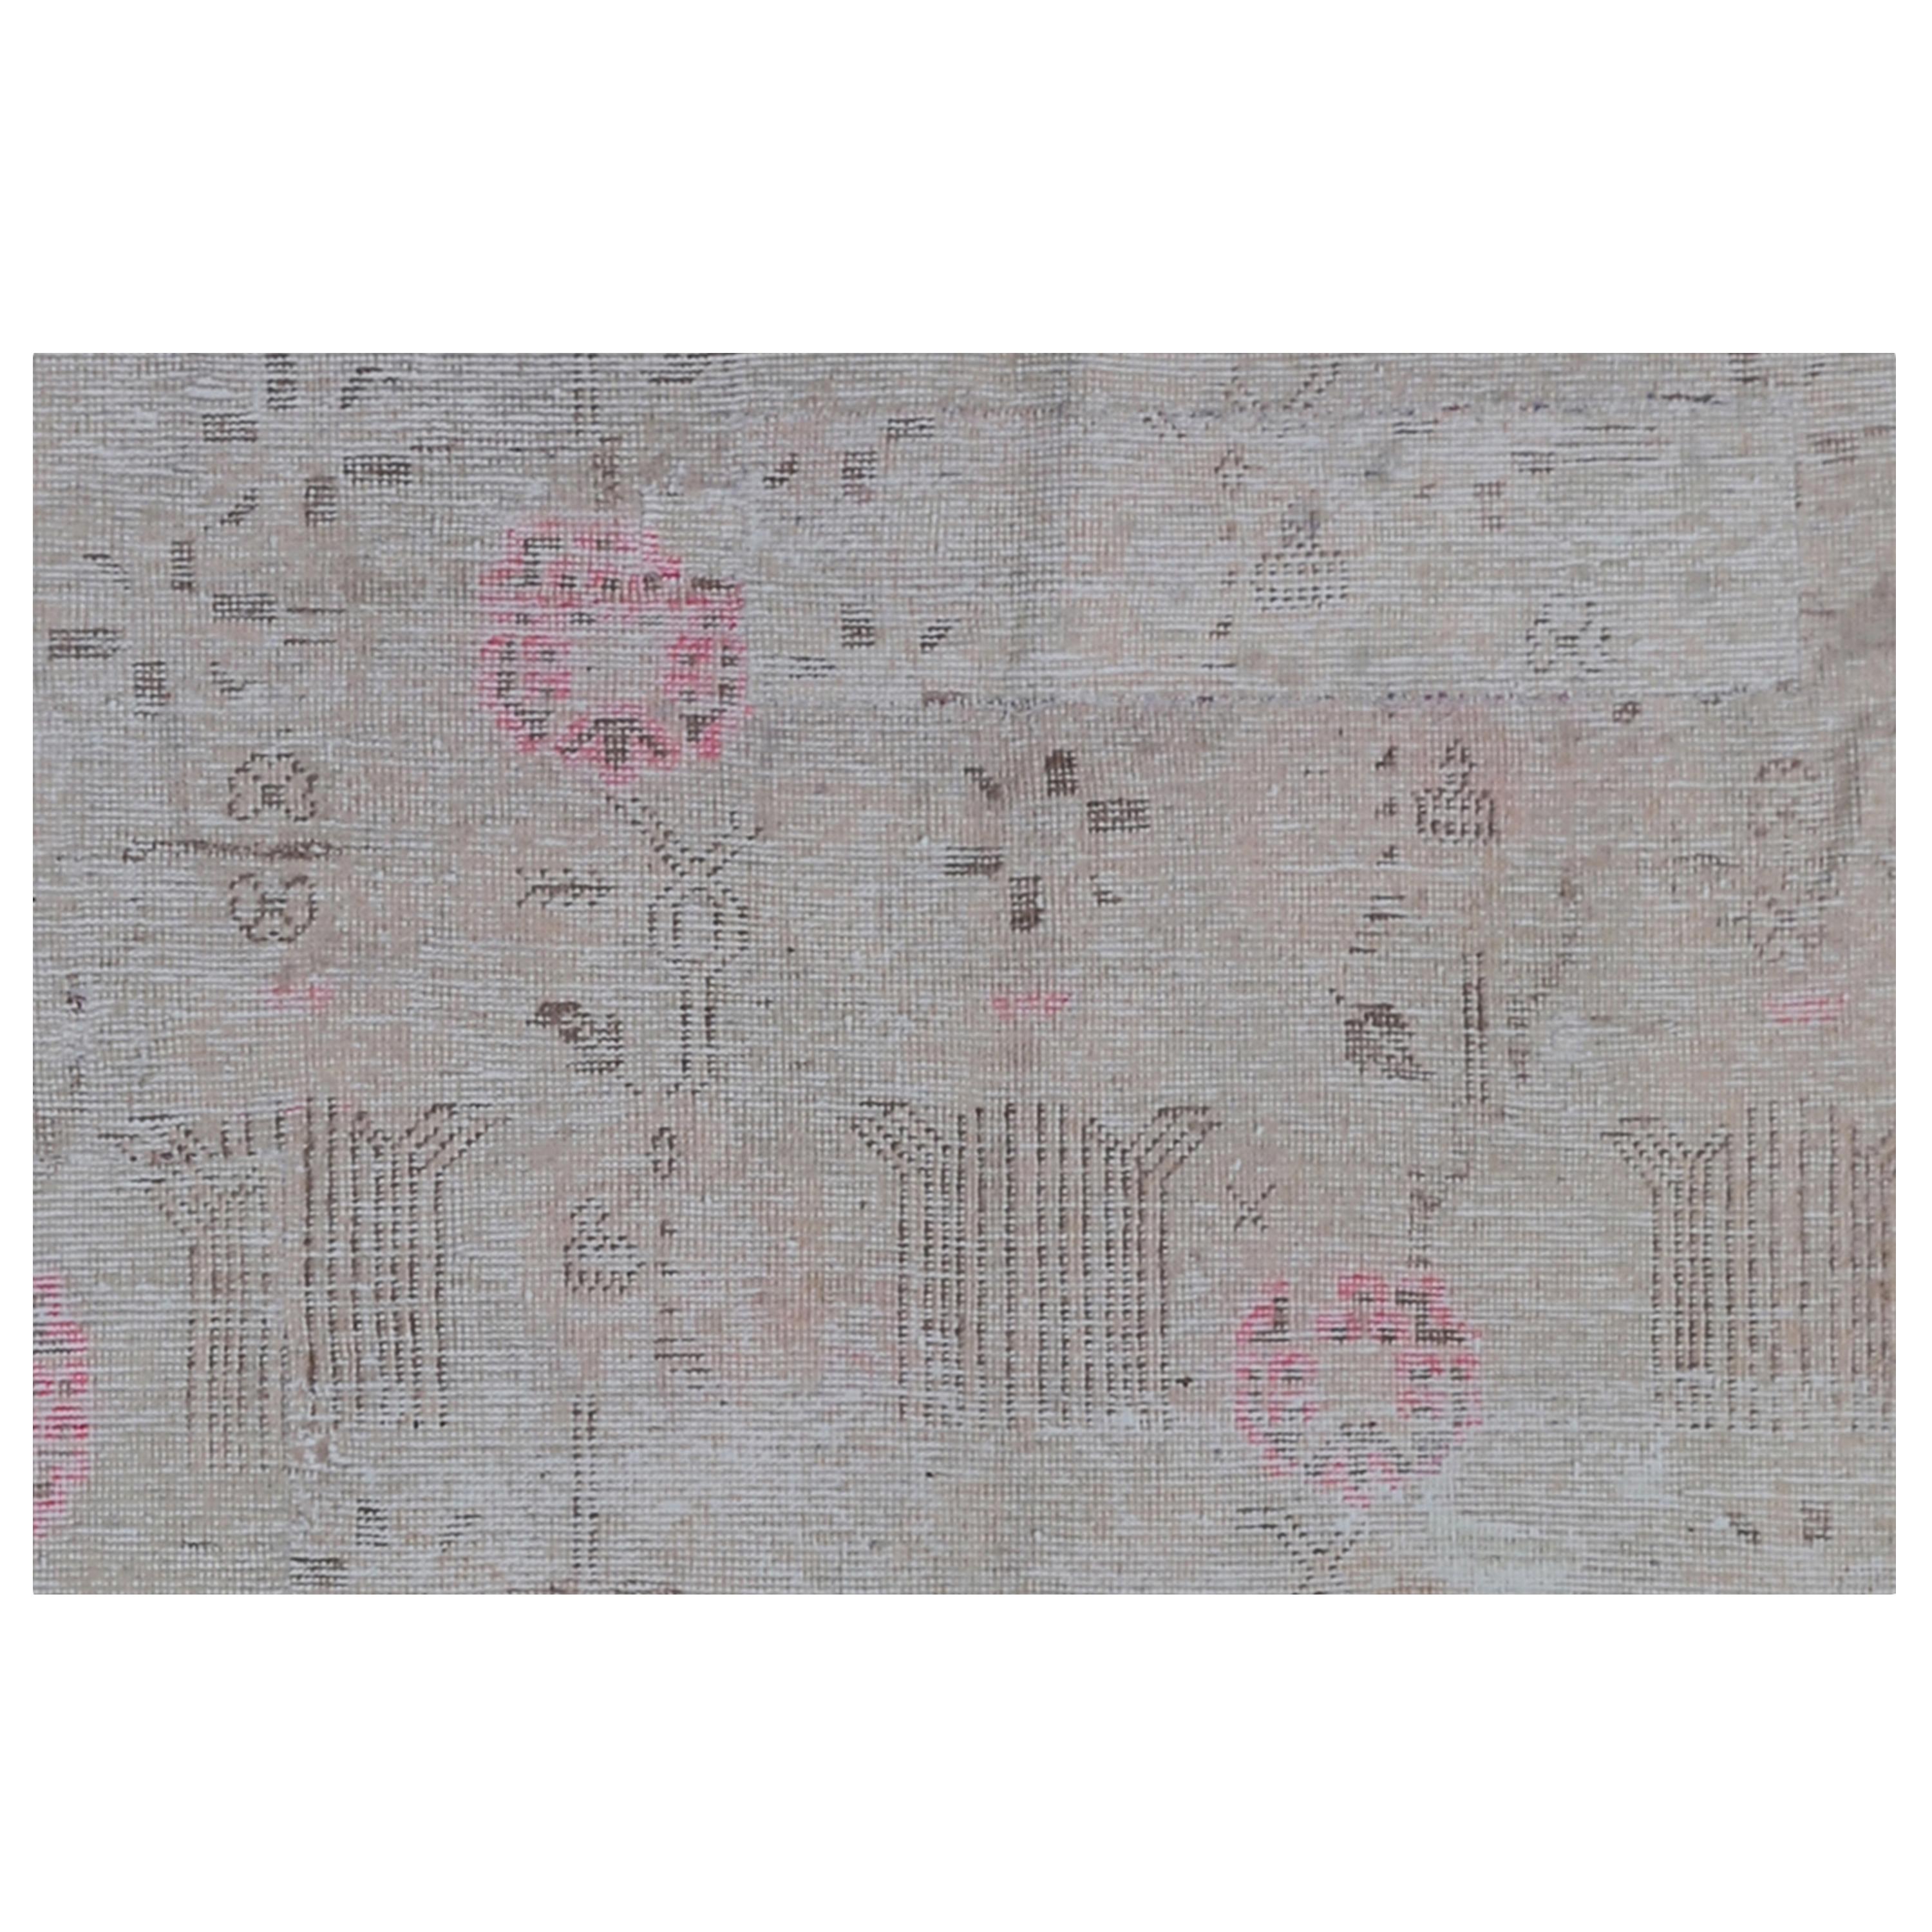 Sourced from the ancient Silk Road to bring a genuine one-of-a-kind rug to your home, this Grey and Pink Vintage Wool Cotton Blend Rug - 6'1